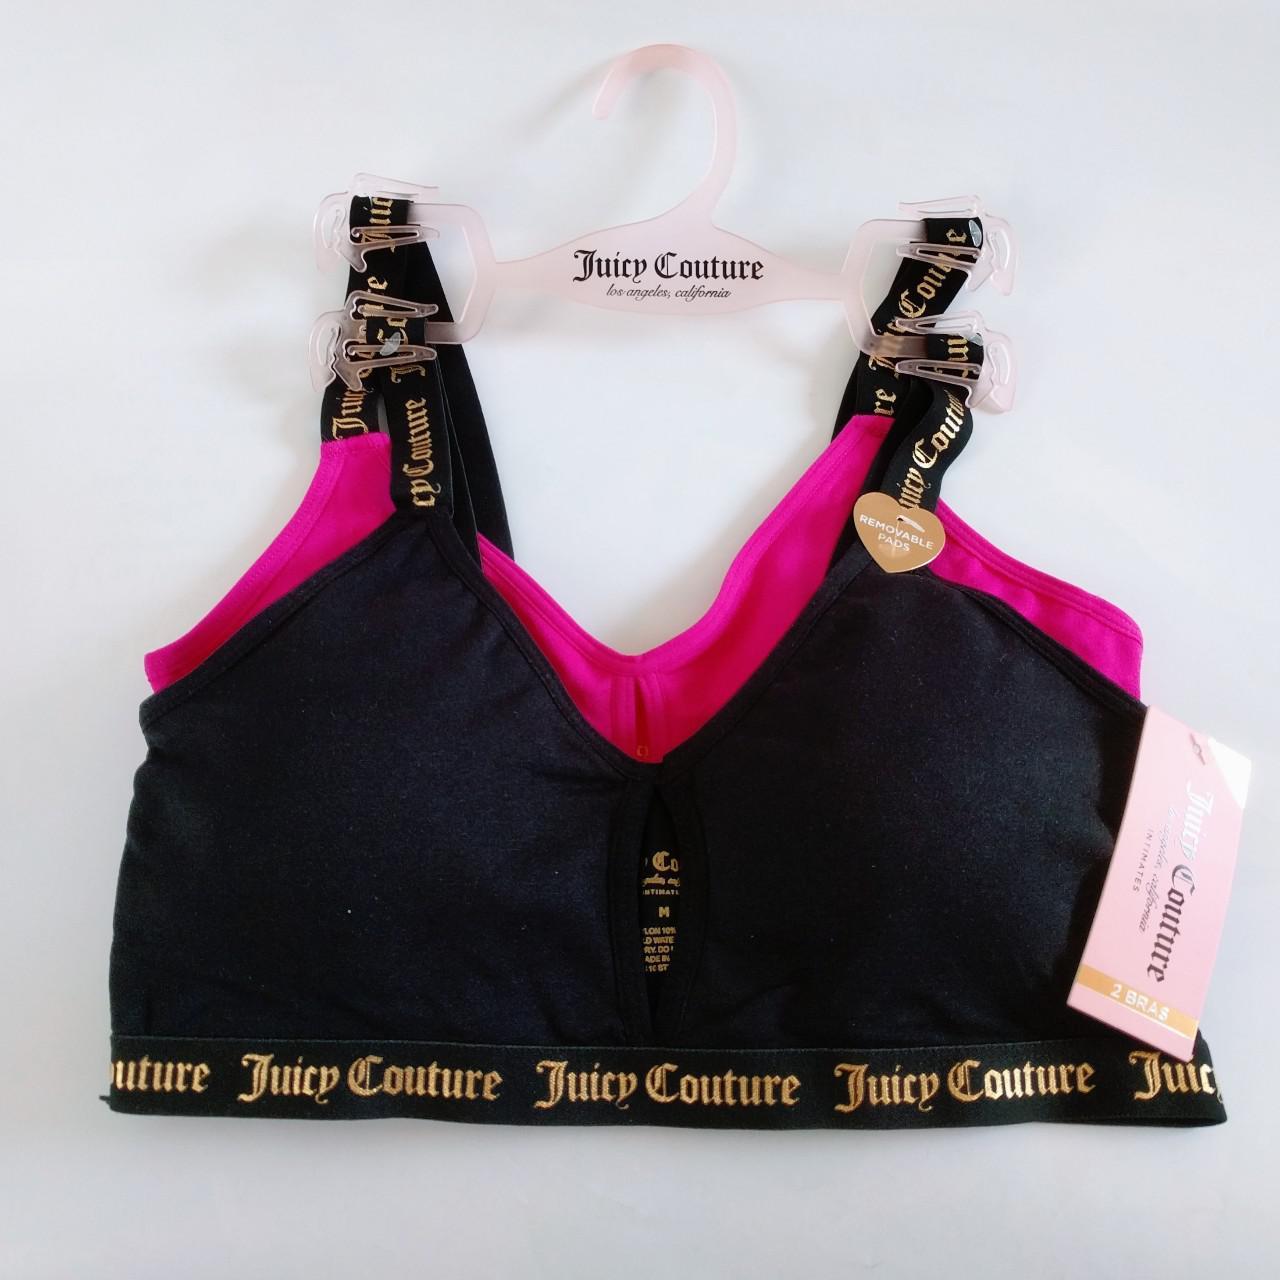 Juicy Couture, Intimates & Sleepwear, Juicy Couture 2 Pack Show Me Off Bra  Set Nwt